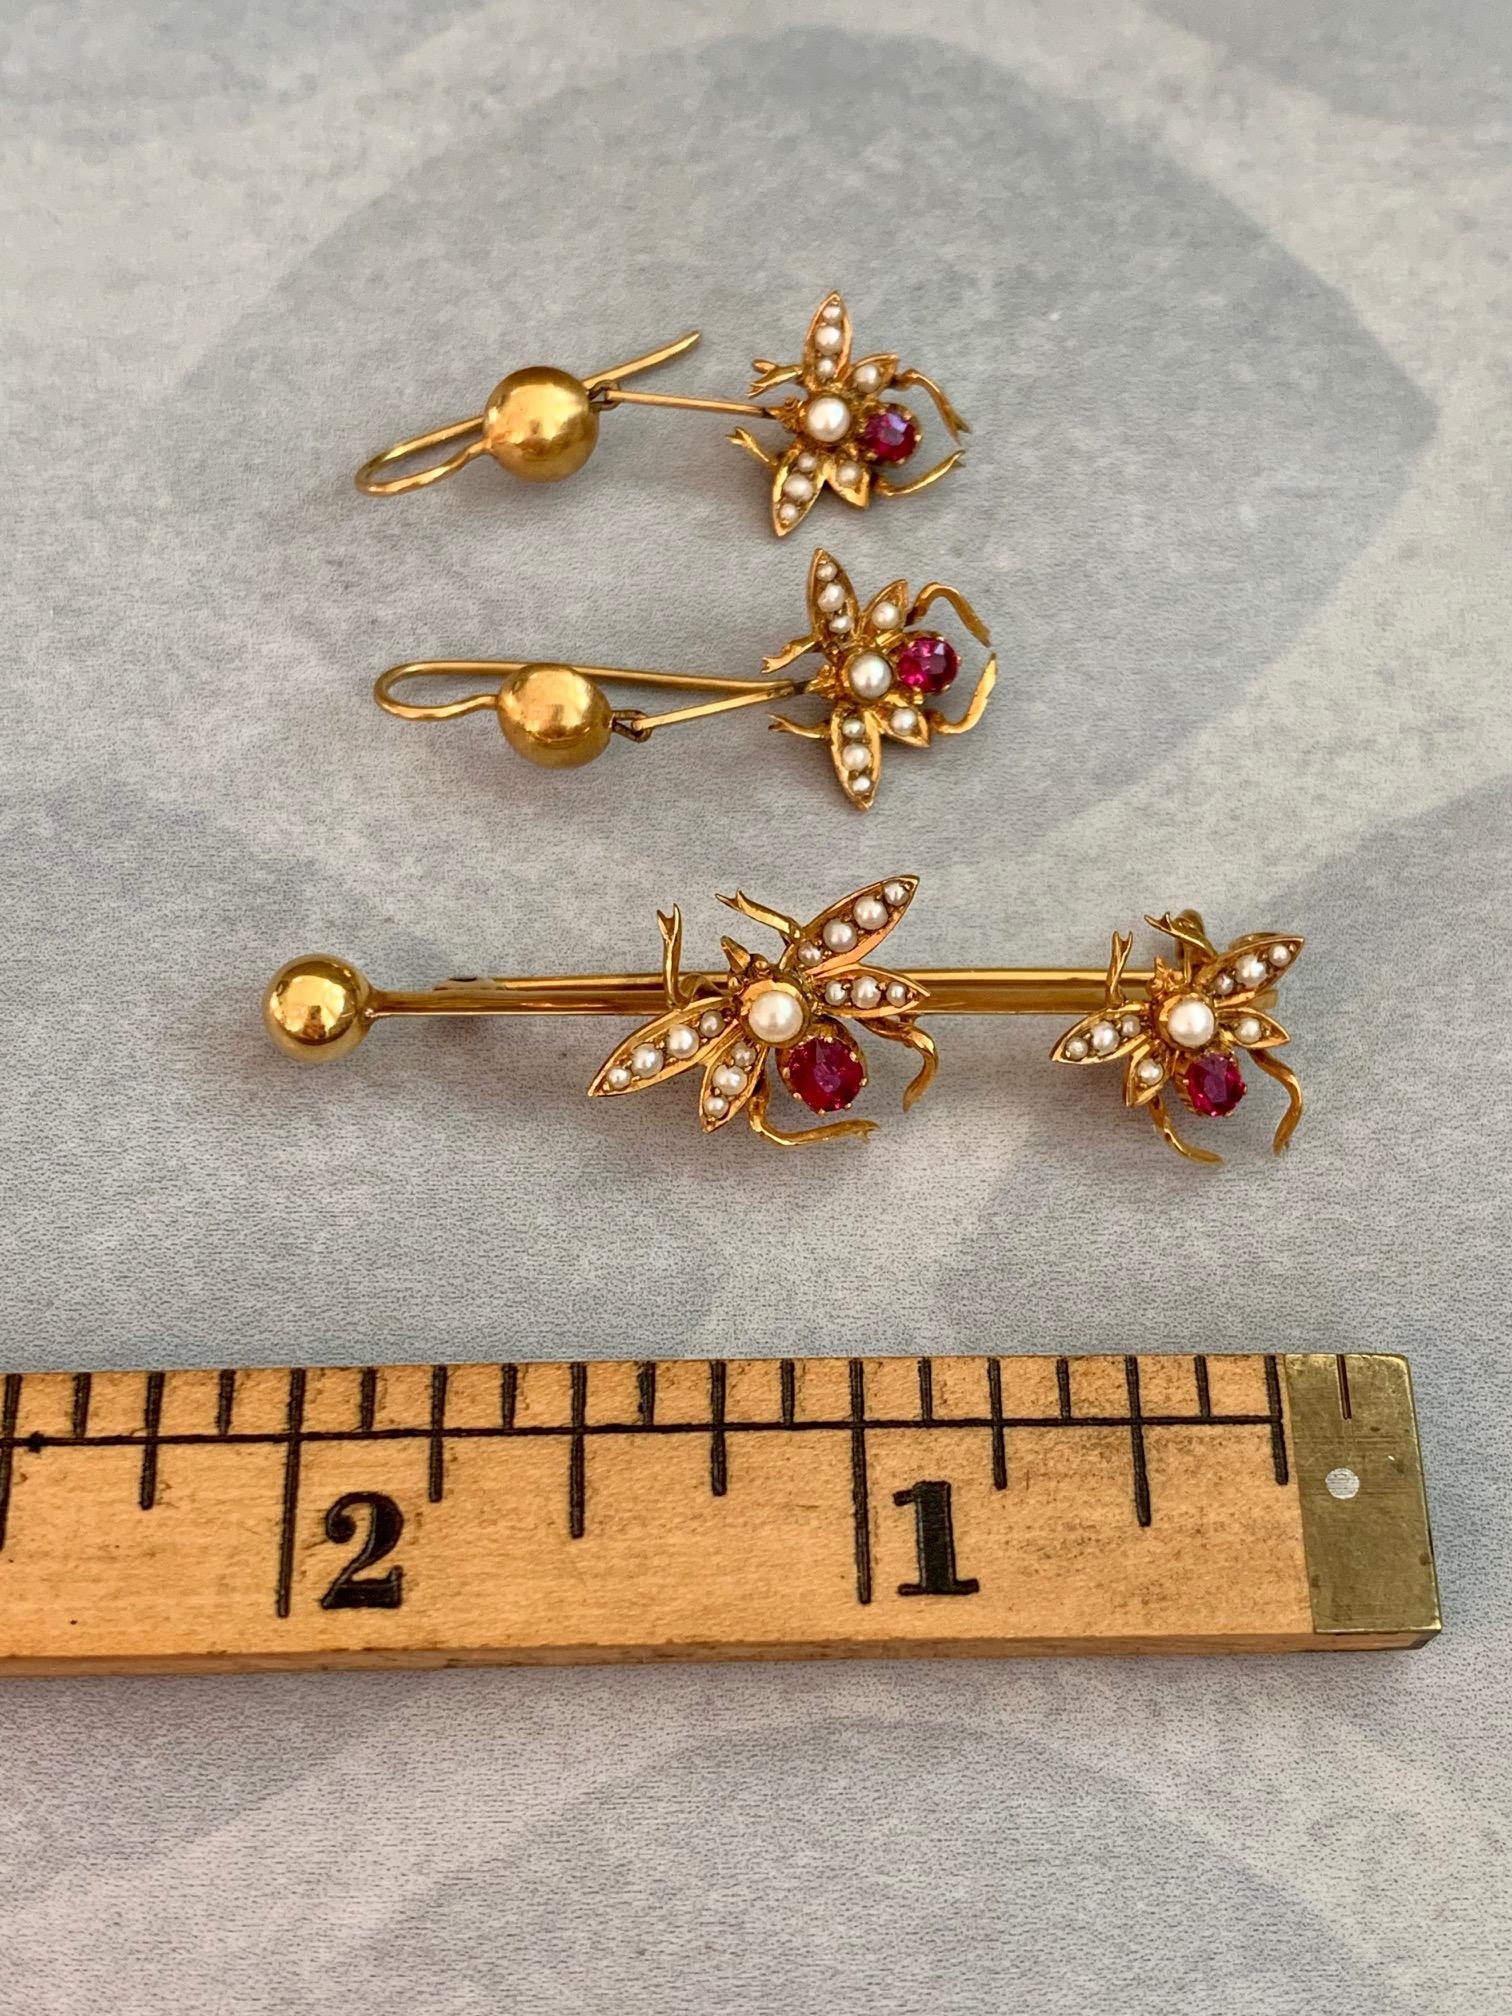 Vintage Gold Insect Pin and Earring Set 2